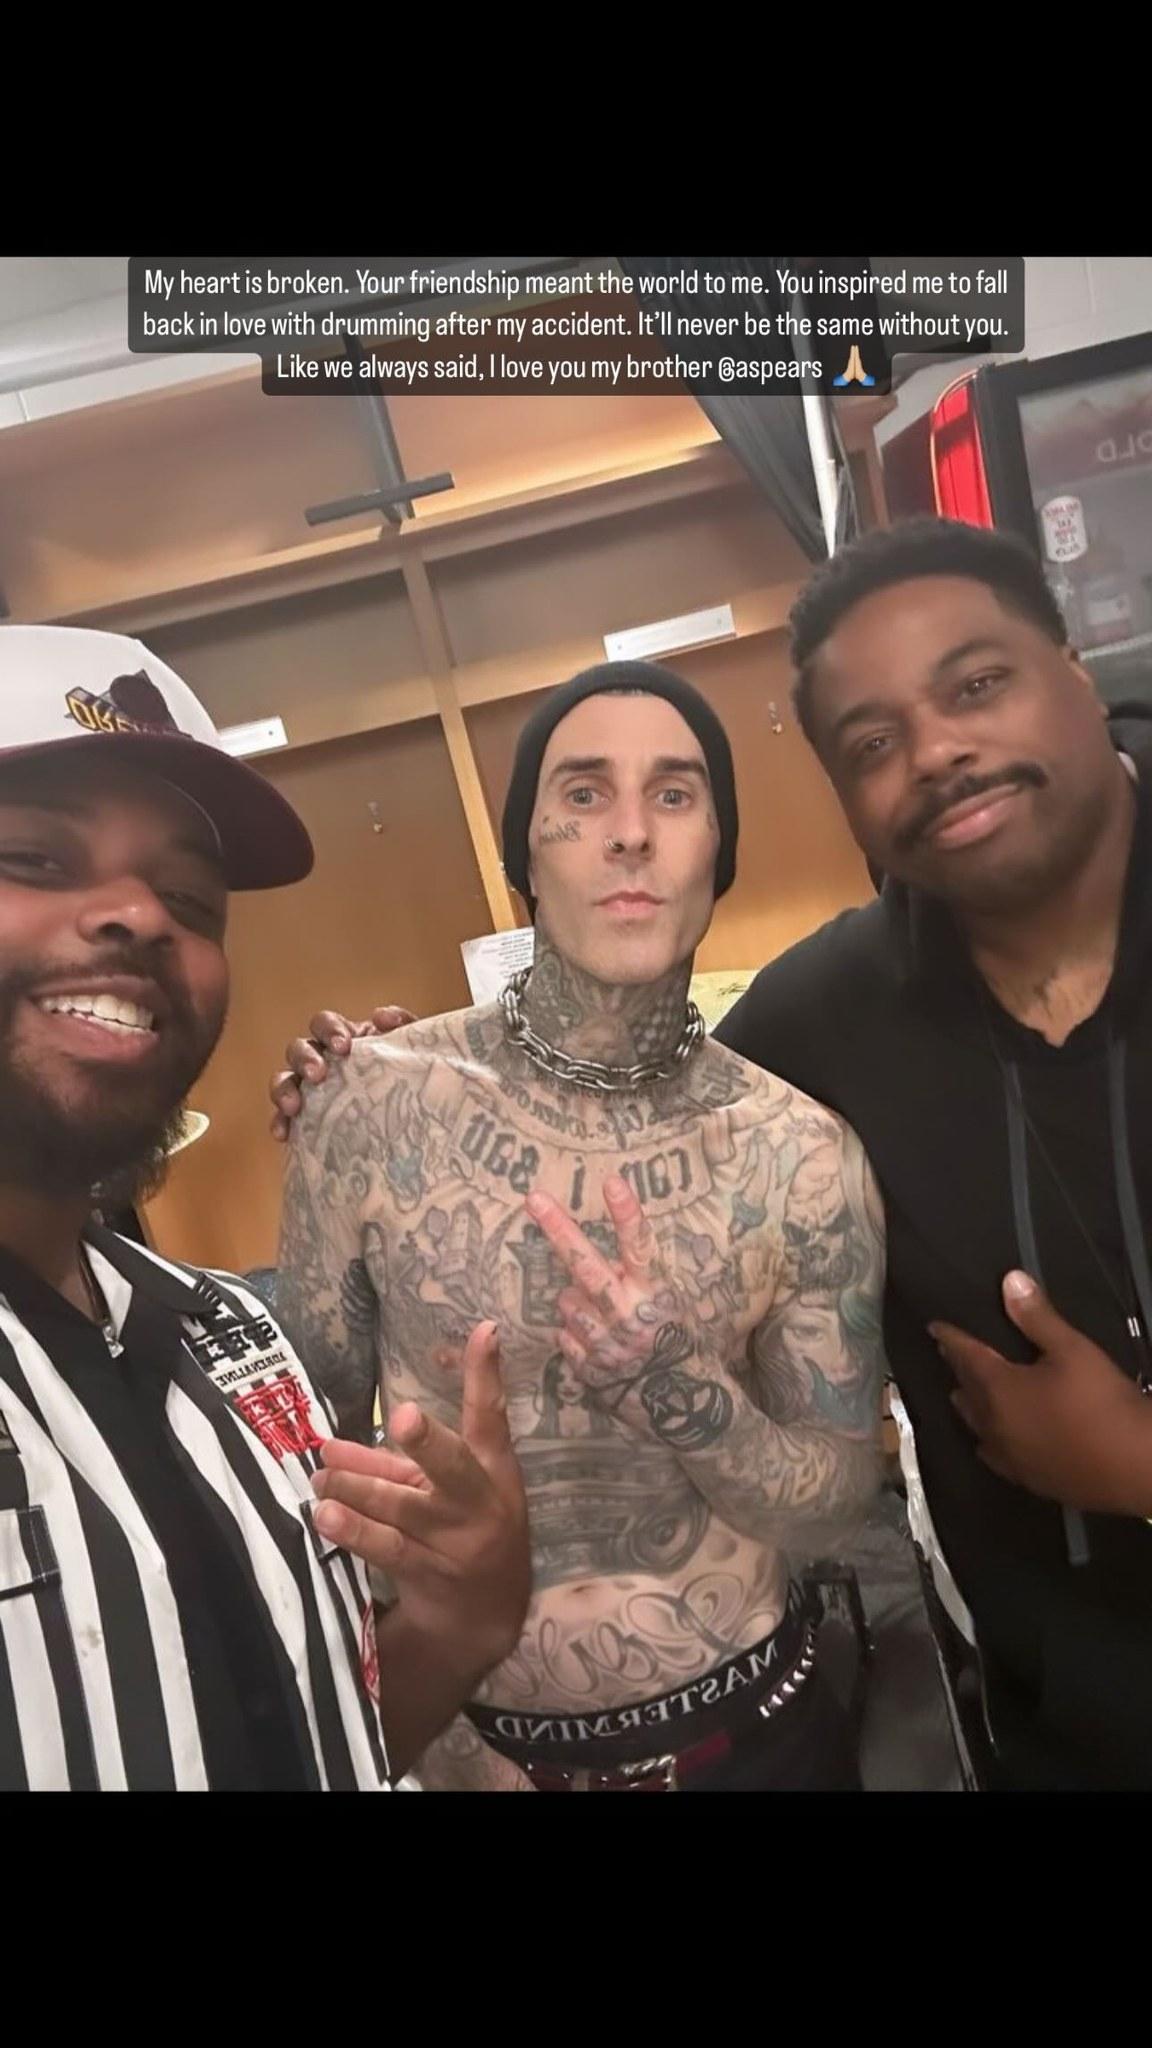 Travis Barker pays tribute to Aaron Spears